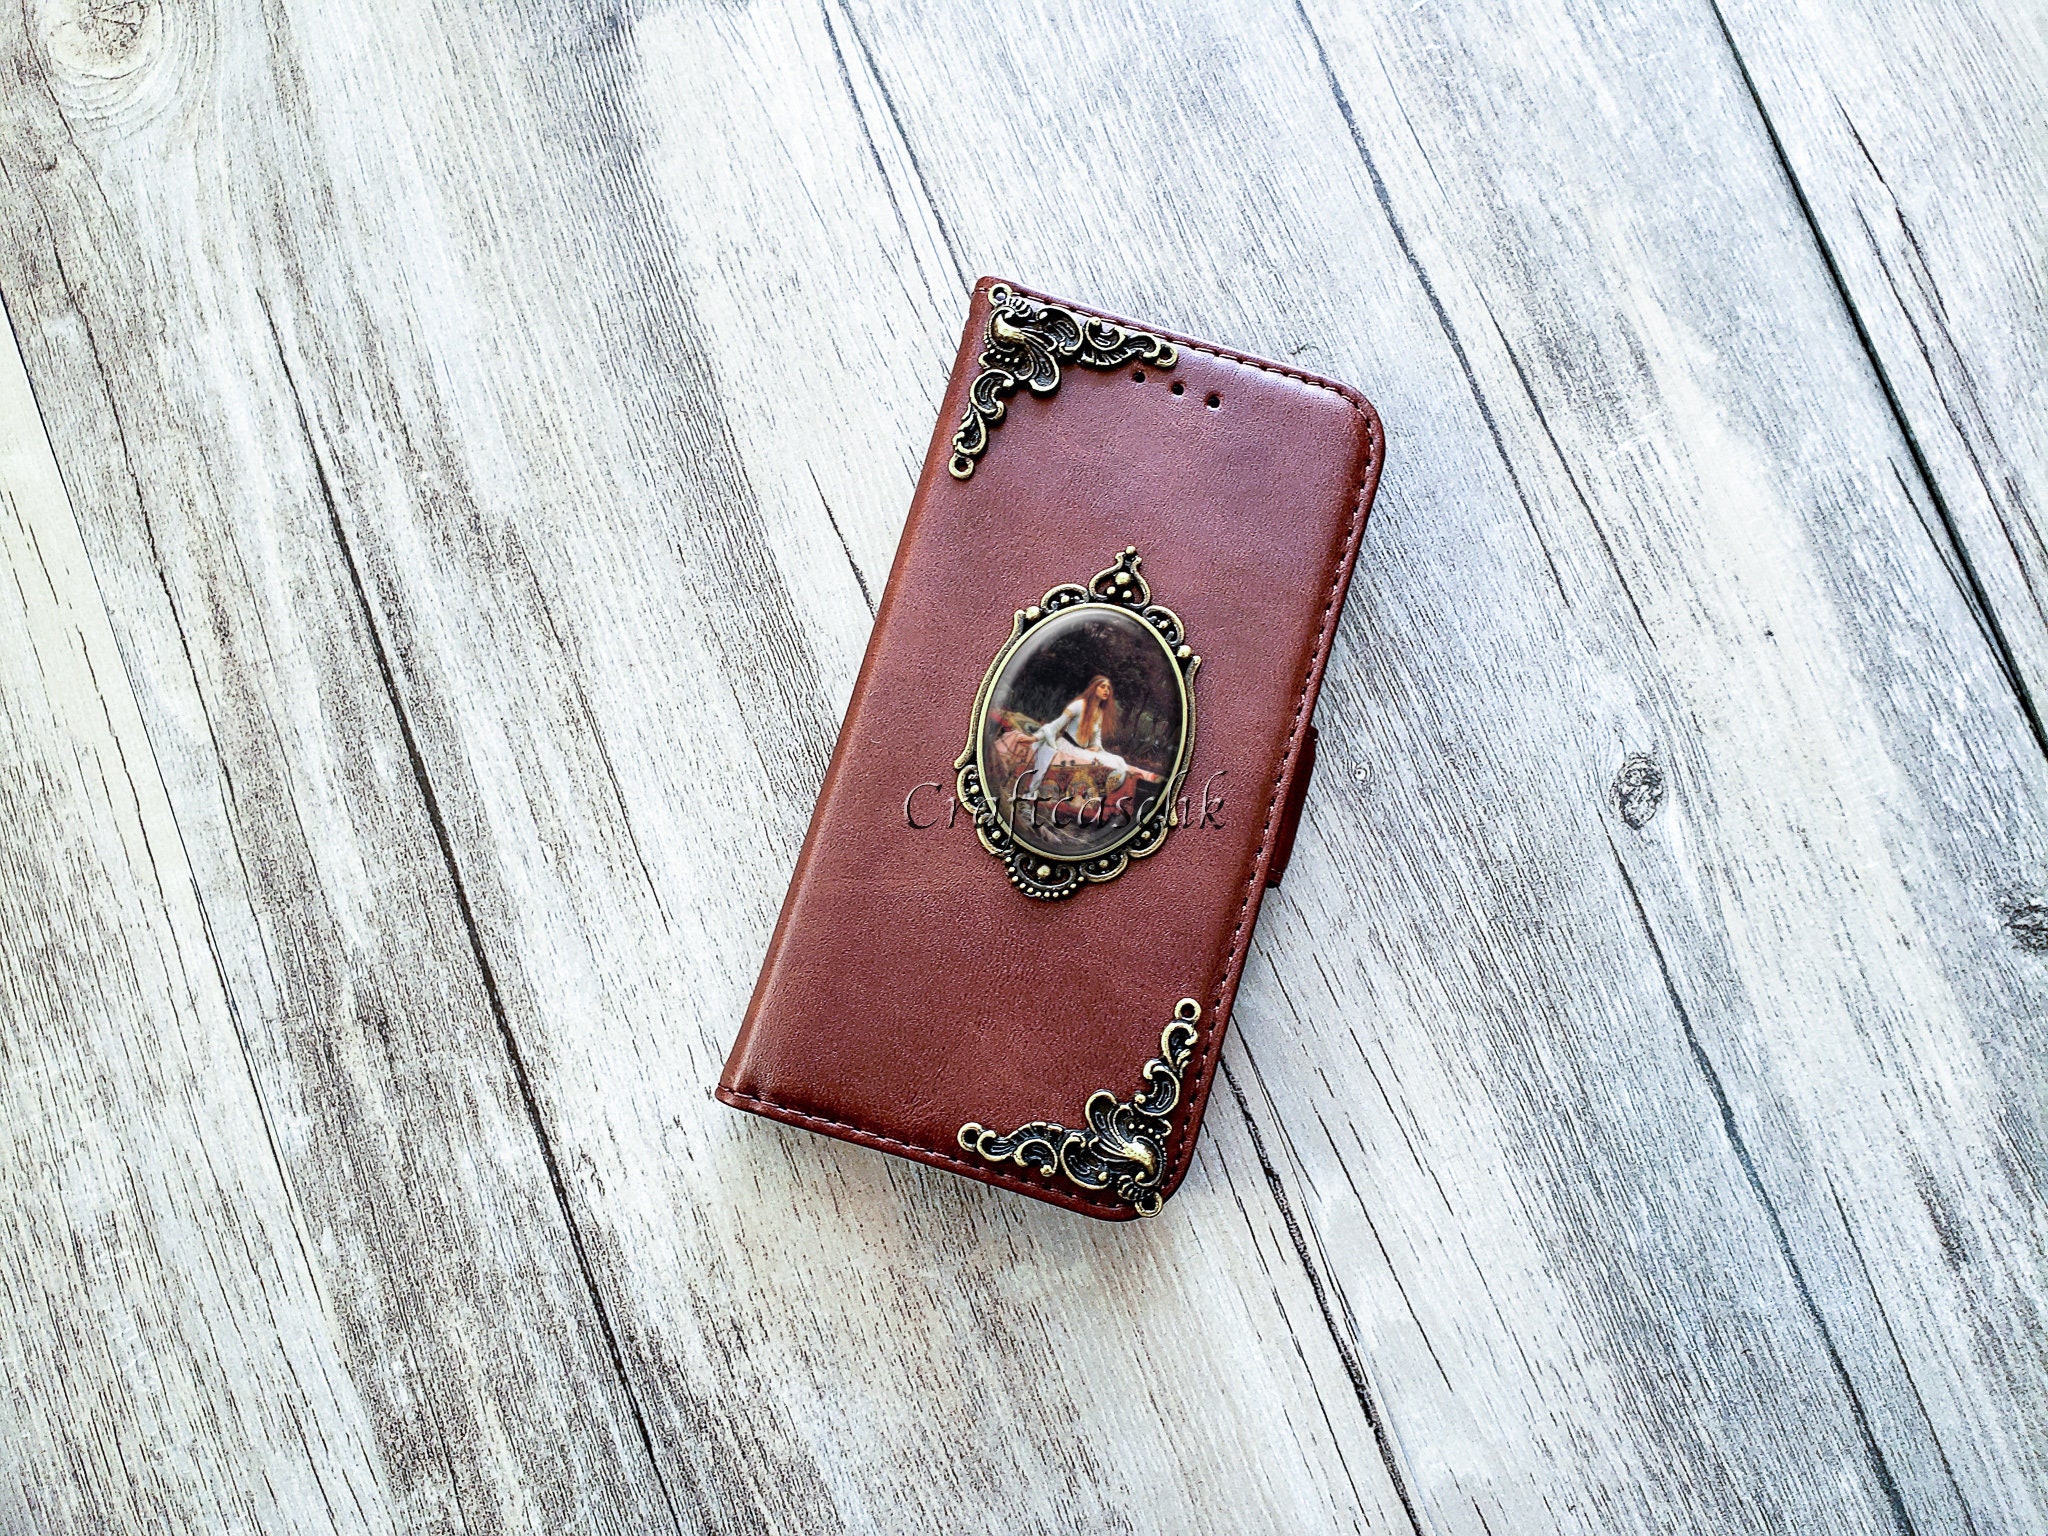 Lady Of Shalott Phone Leather Wallet Case For Iphone X Xs Xr Etsy Australia